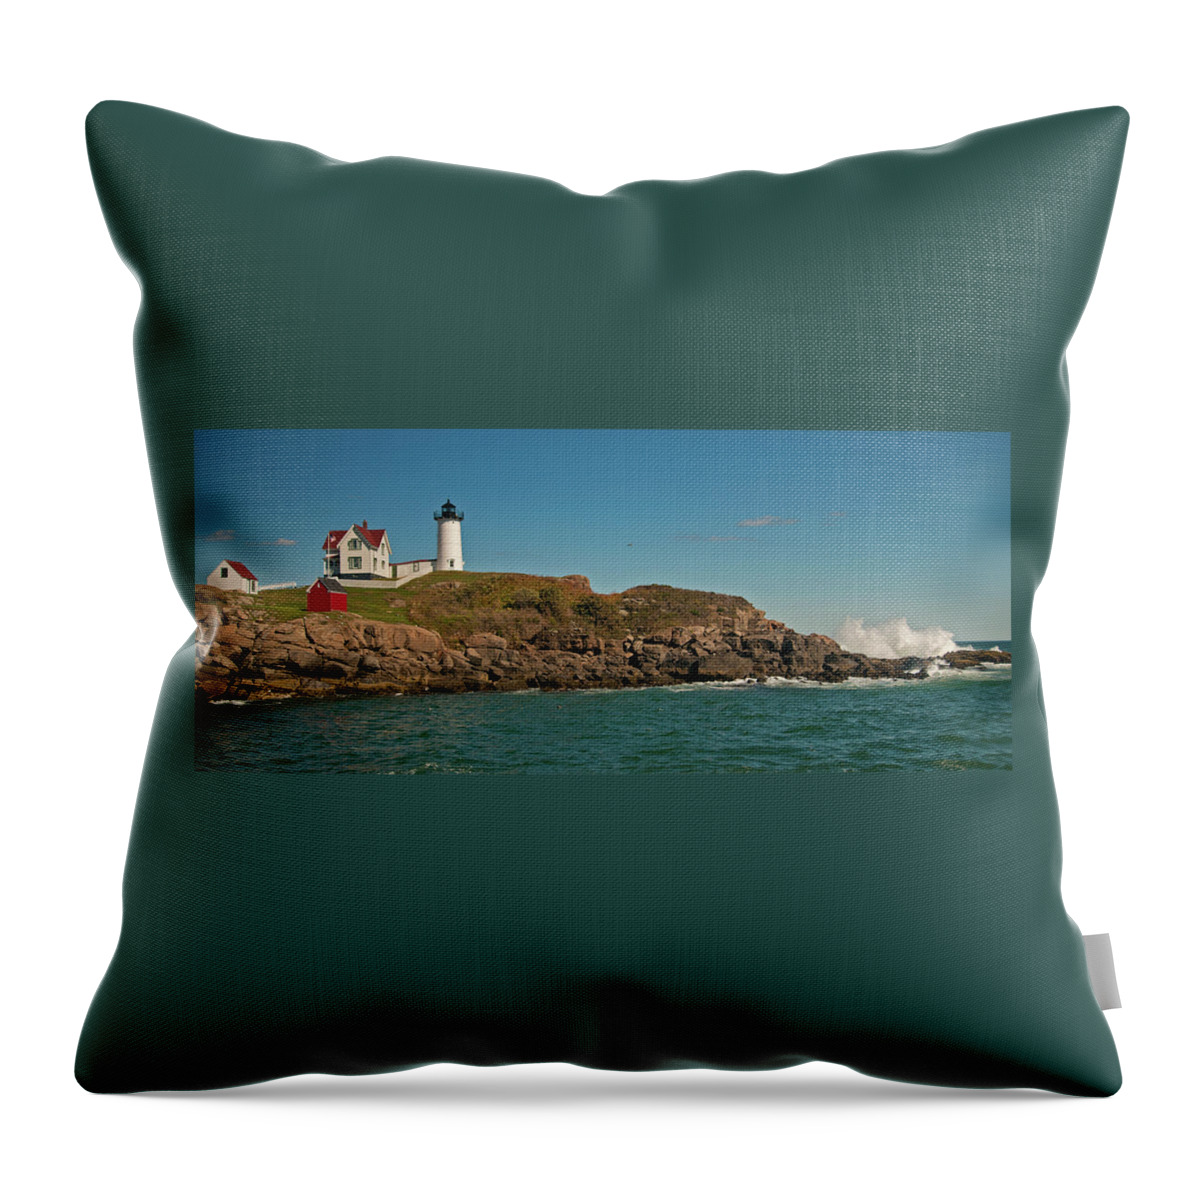 Nubble Light Throw Pillow featuring the photograph Crashing at the Nubble Light by Paul Mangold